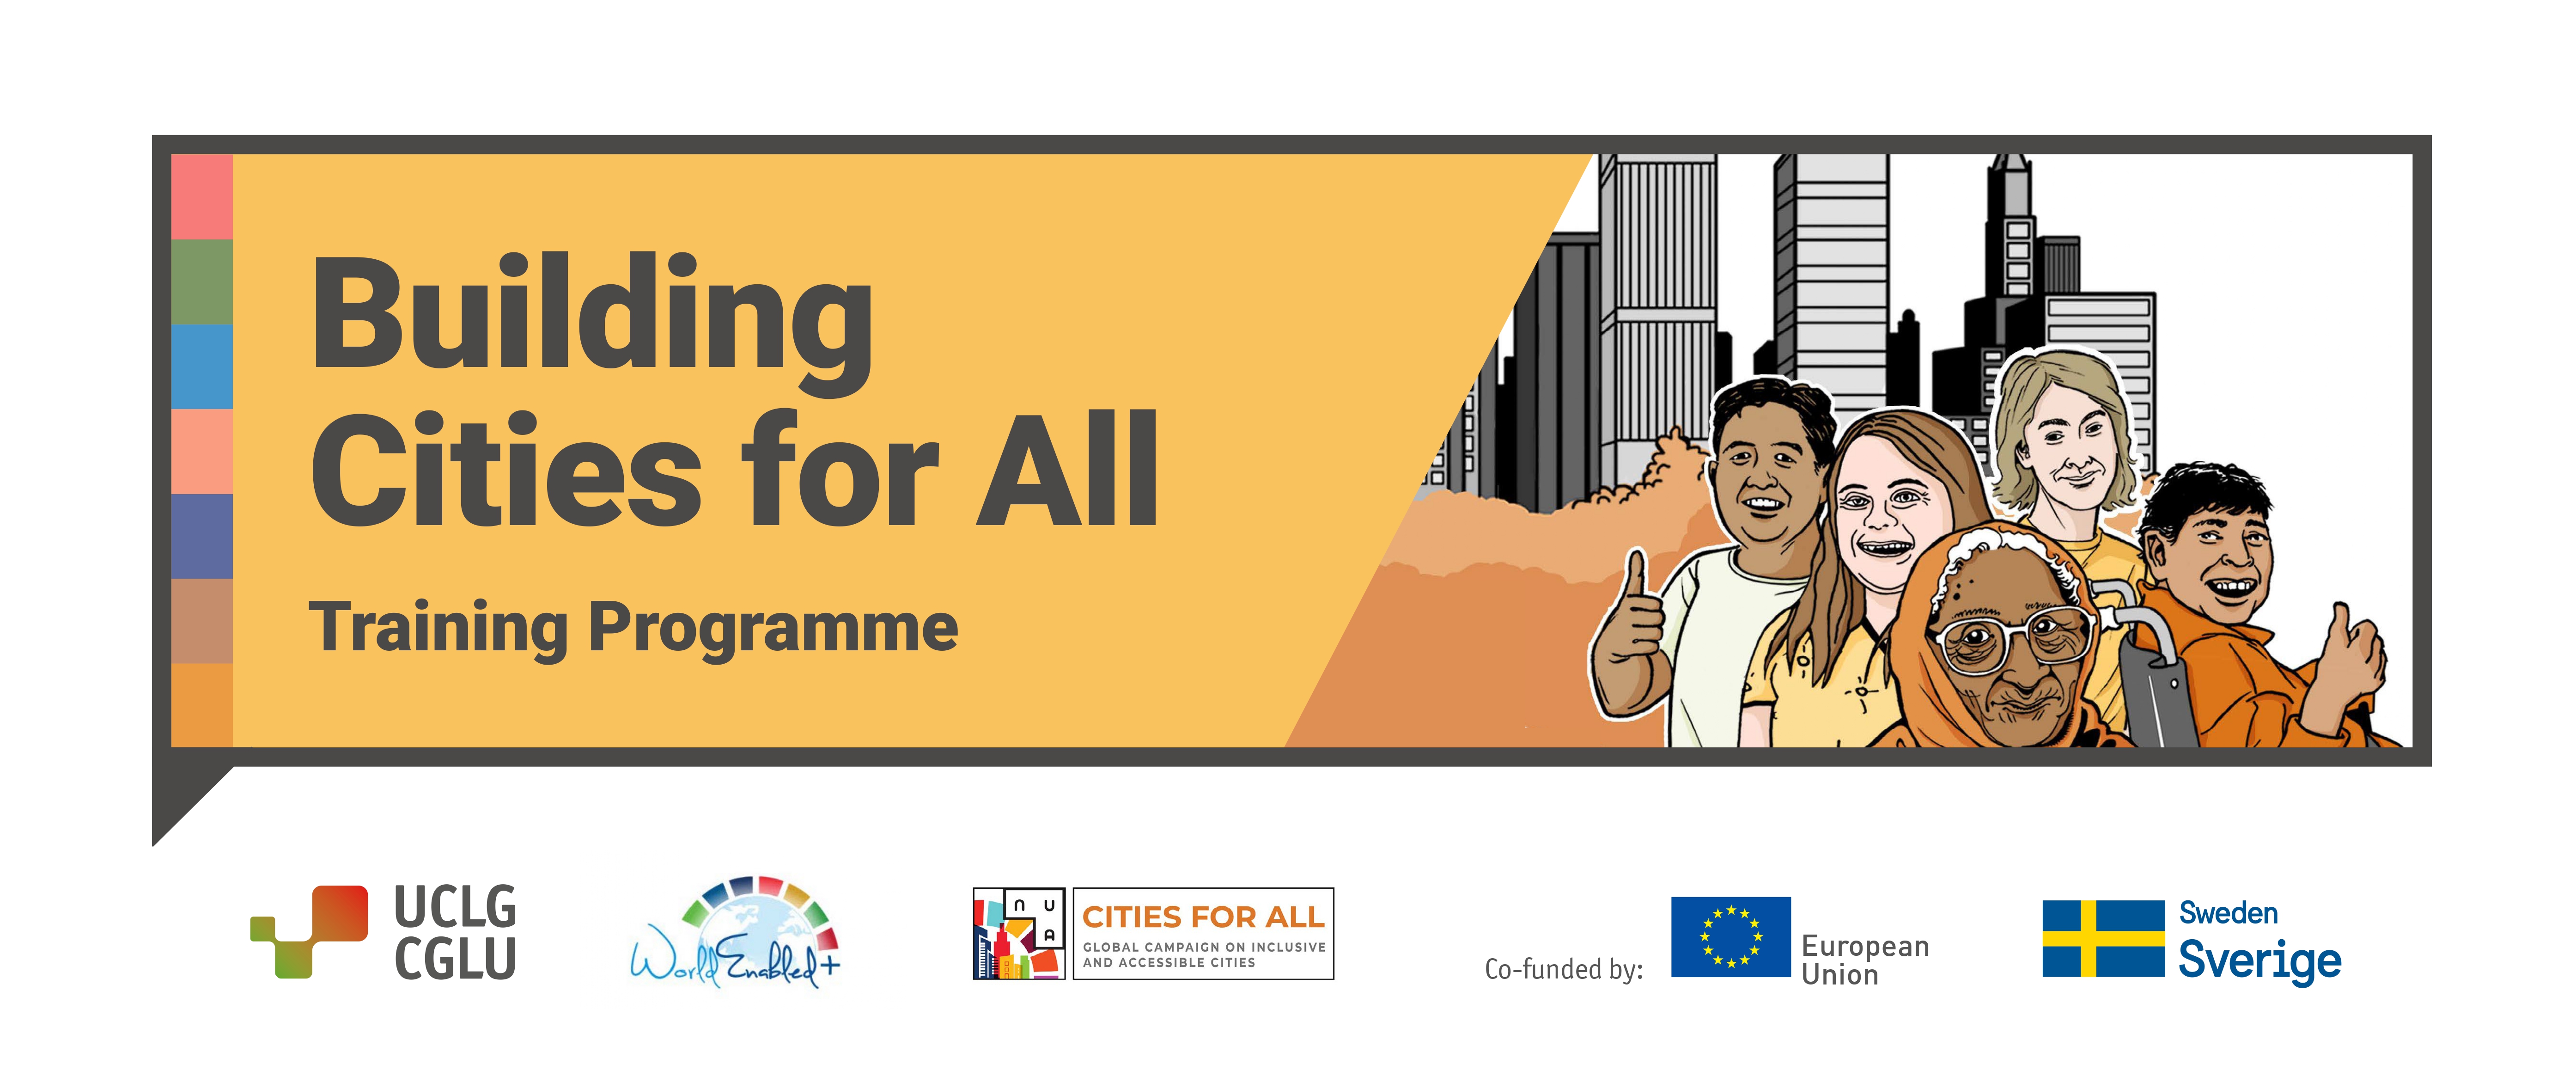 Building Cities for All Training Program with logos of UCLG, World Enabled, Cities for All Global Compact and Campaign, the European Union and the Swedish Government